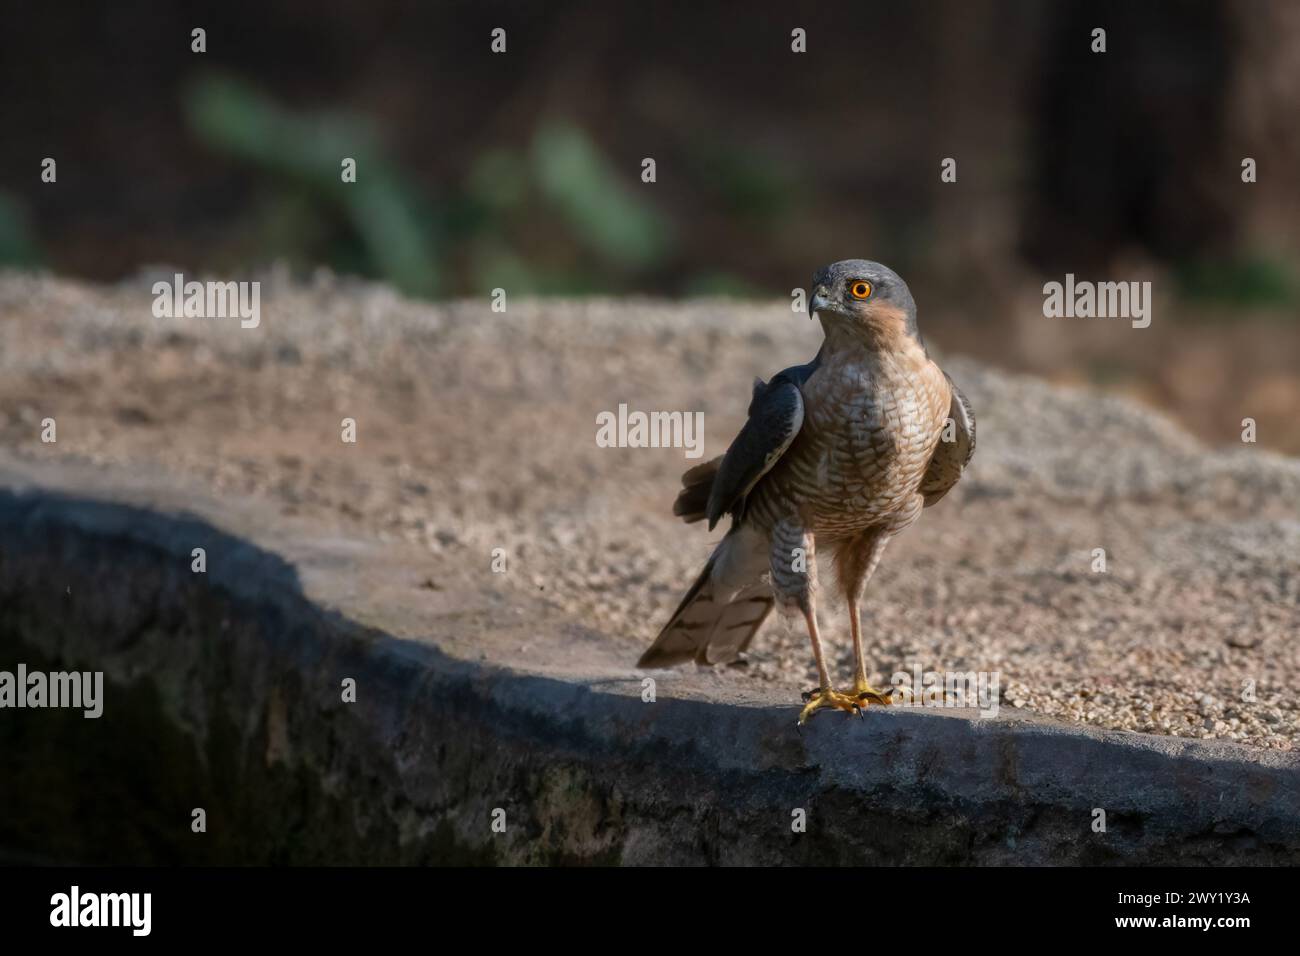 Eurasian sparrowhawk (Accipiter nisus), also known as the northern sparrowhawk or simply the sparrowhawk, observed in Jhalana Leopard Reserve in Rajas Stock Photo